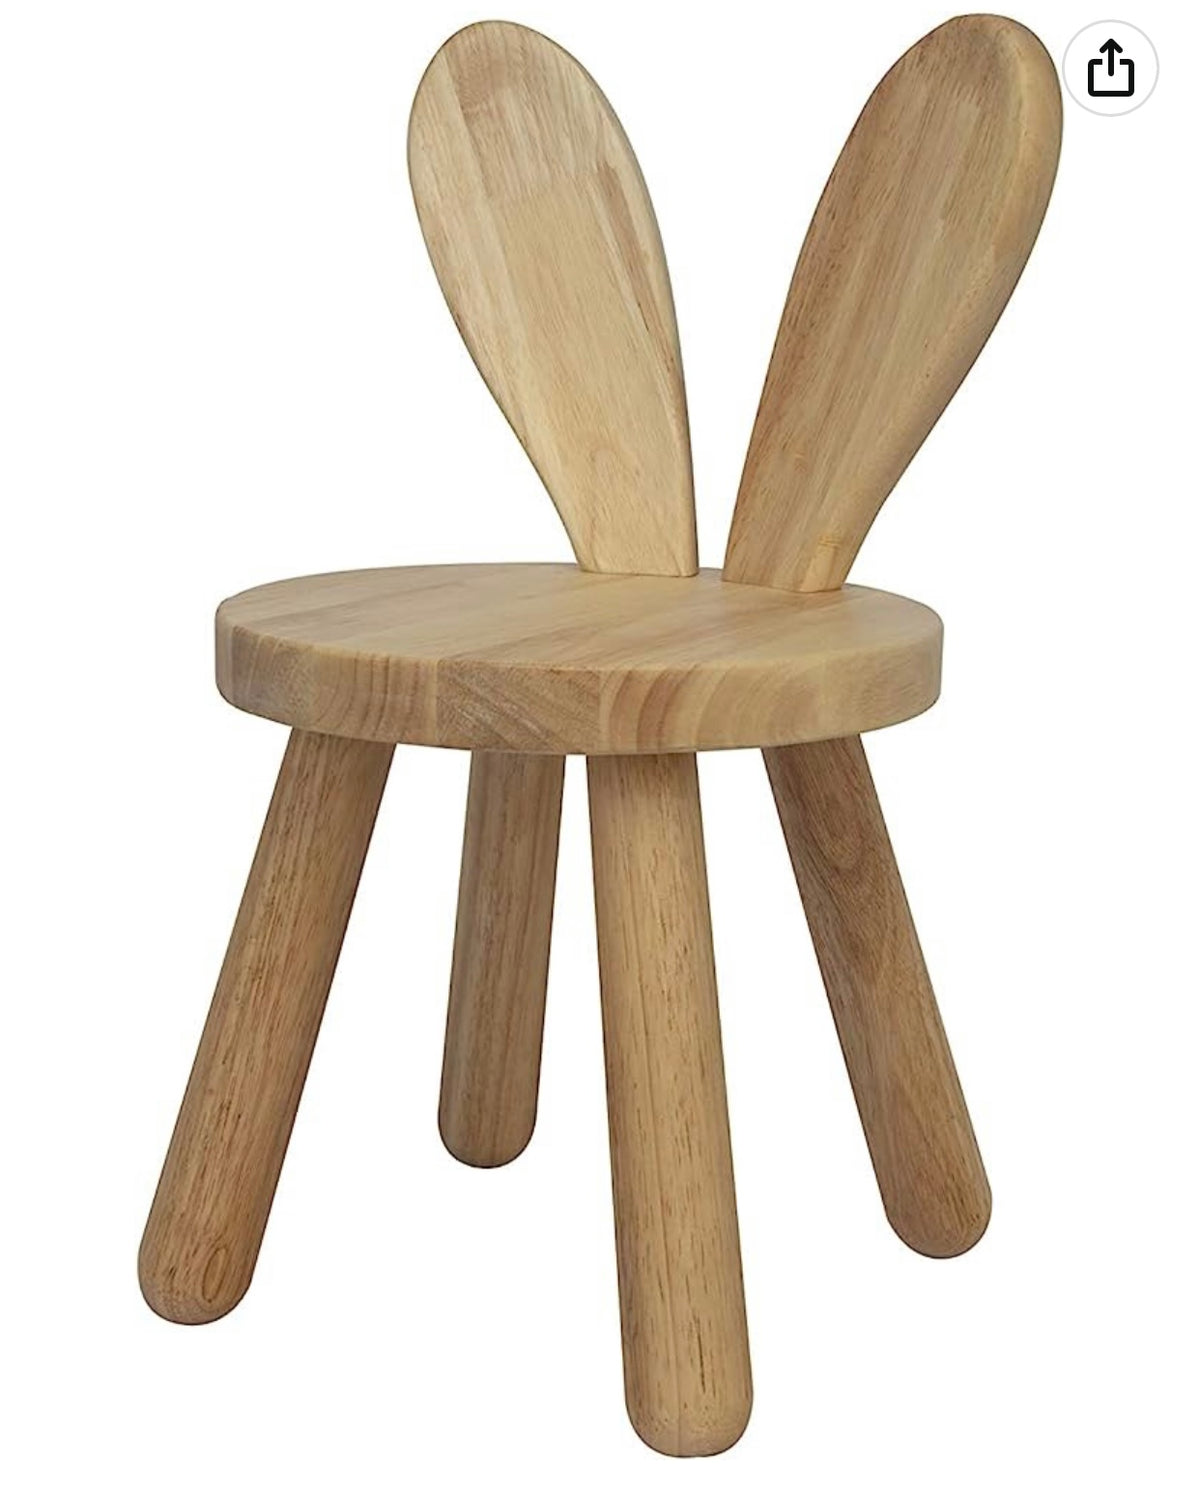 Kids Natural Bunny Chair